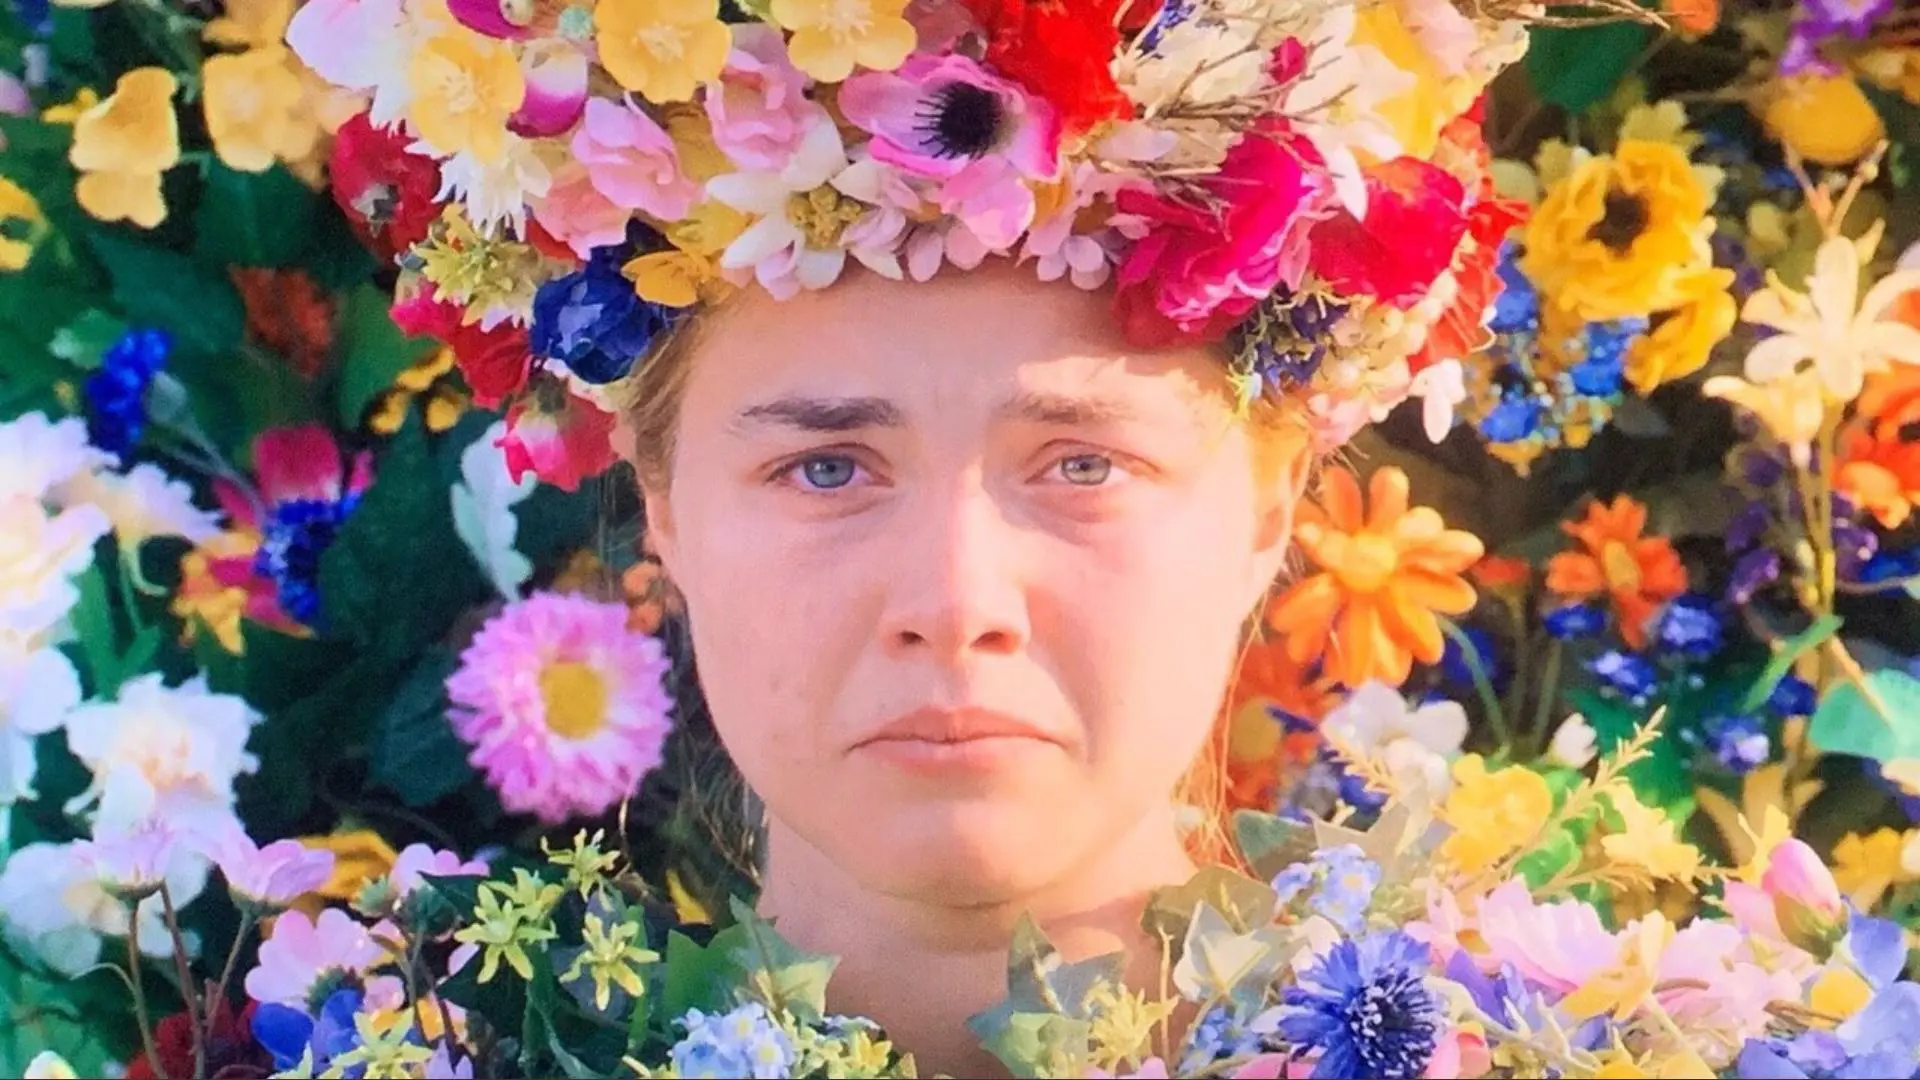 Midsommar | 30 Best Hollywood Thriller Movies | Most Bone-Chilling Hollywood Movies of All Time | TrendPickle